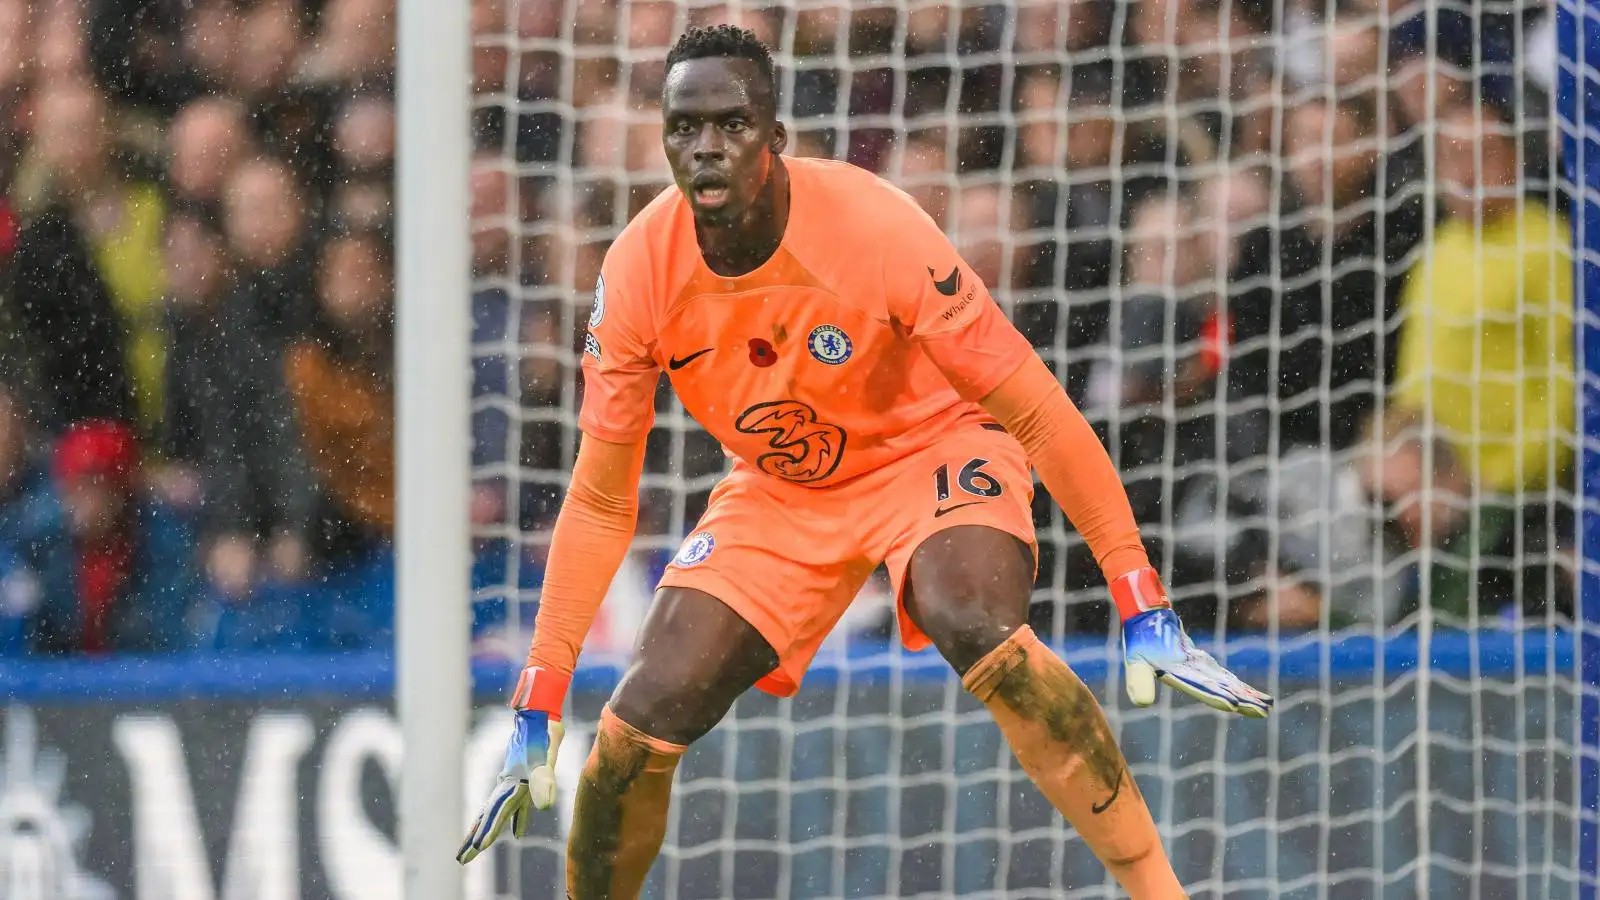 Chelsea goalkeeper Edouard Mendy gets ready to save a shot